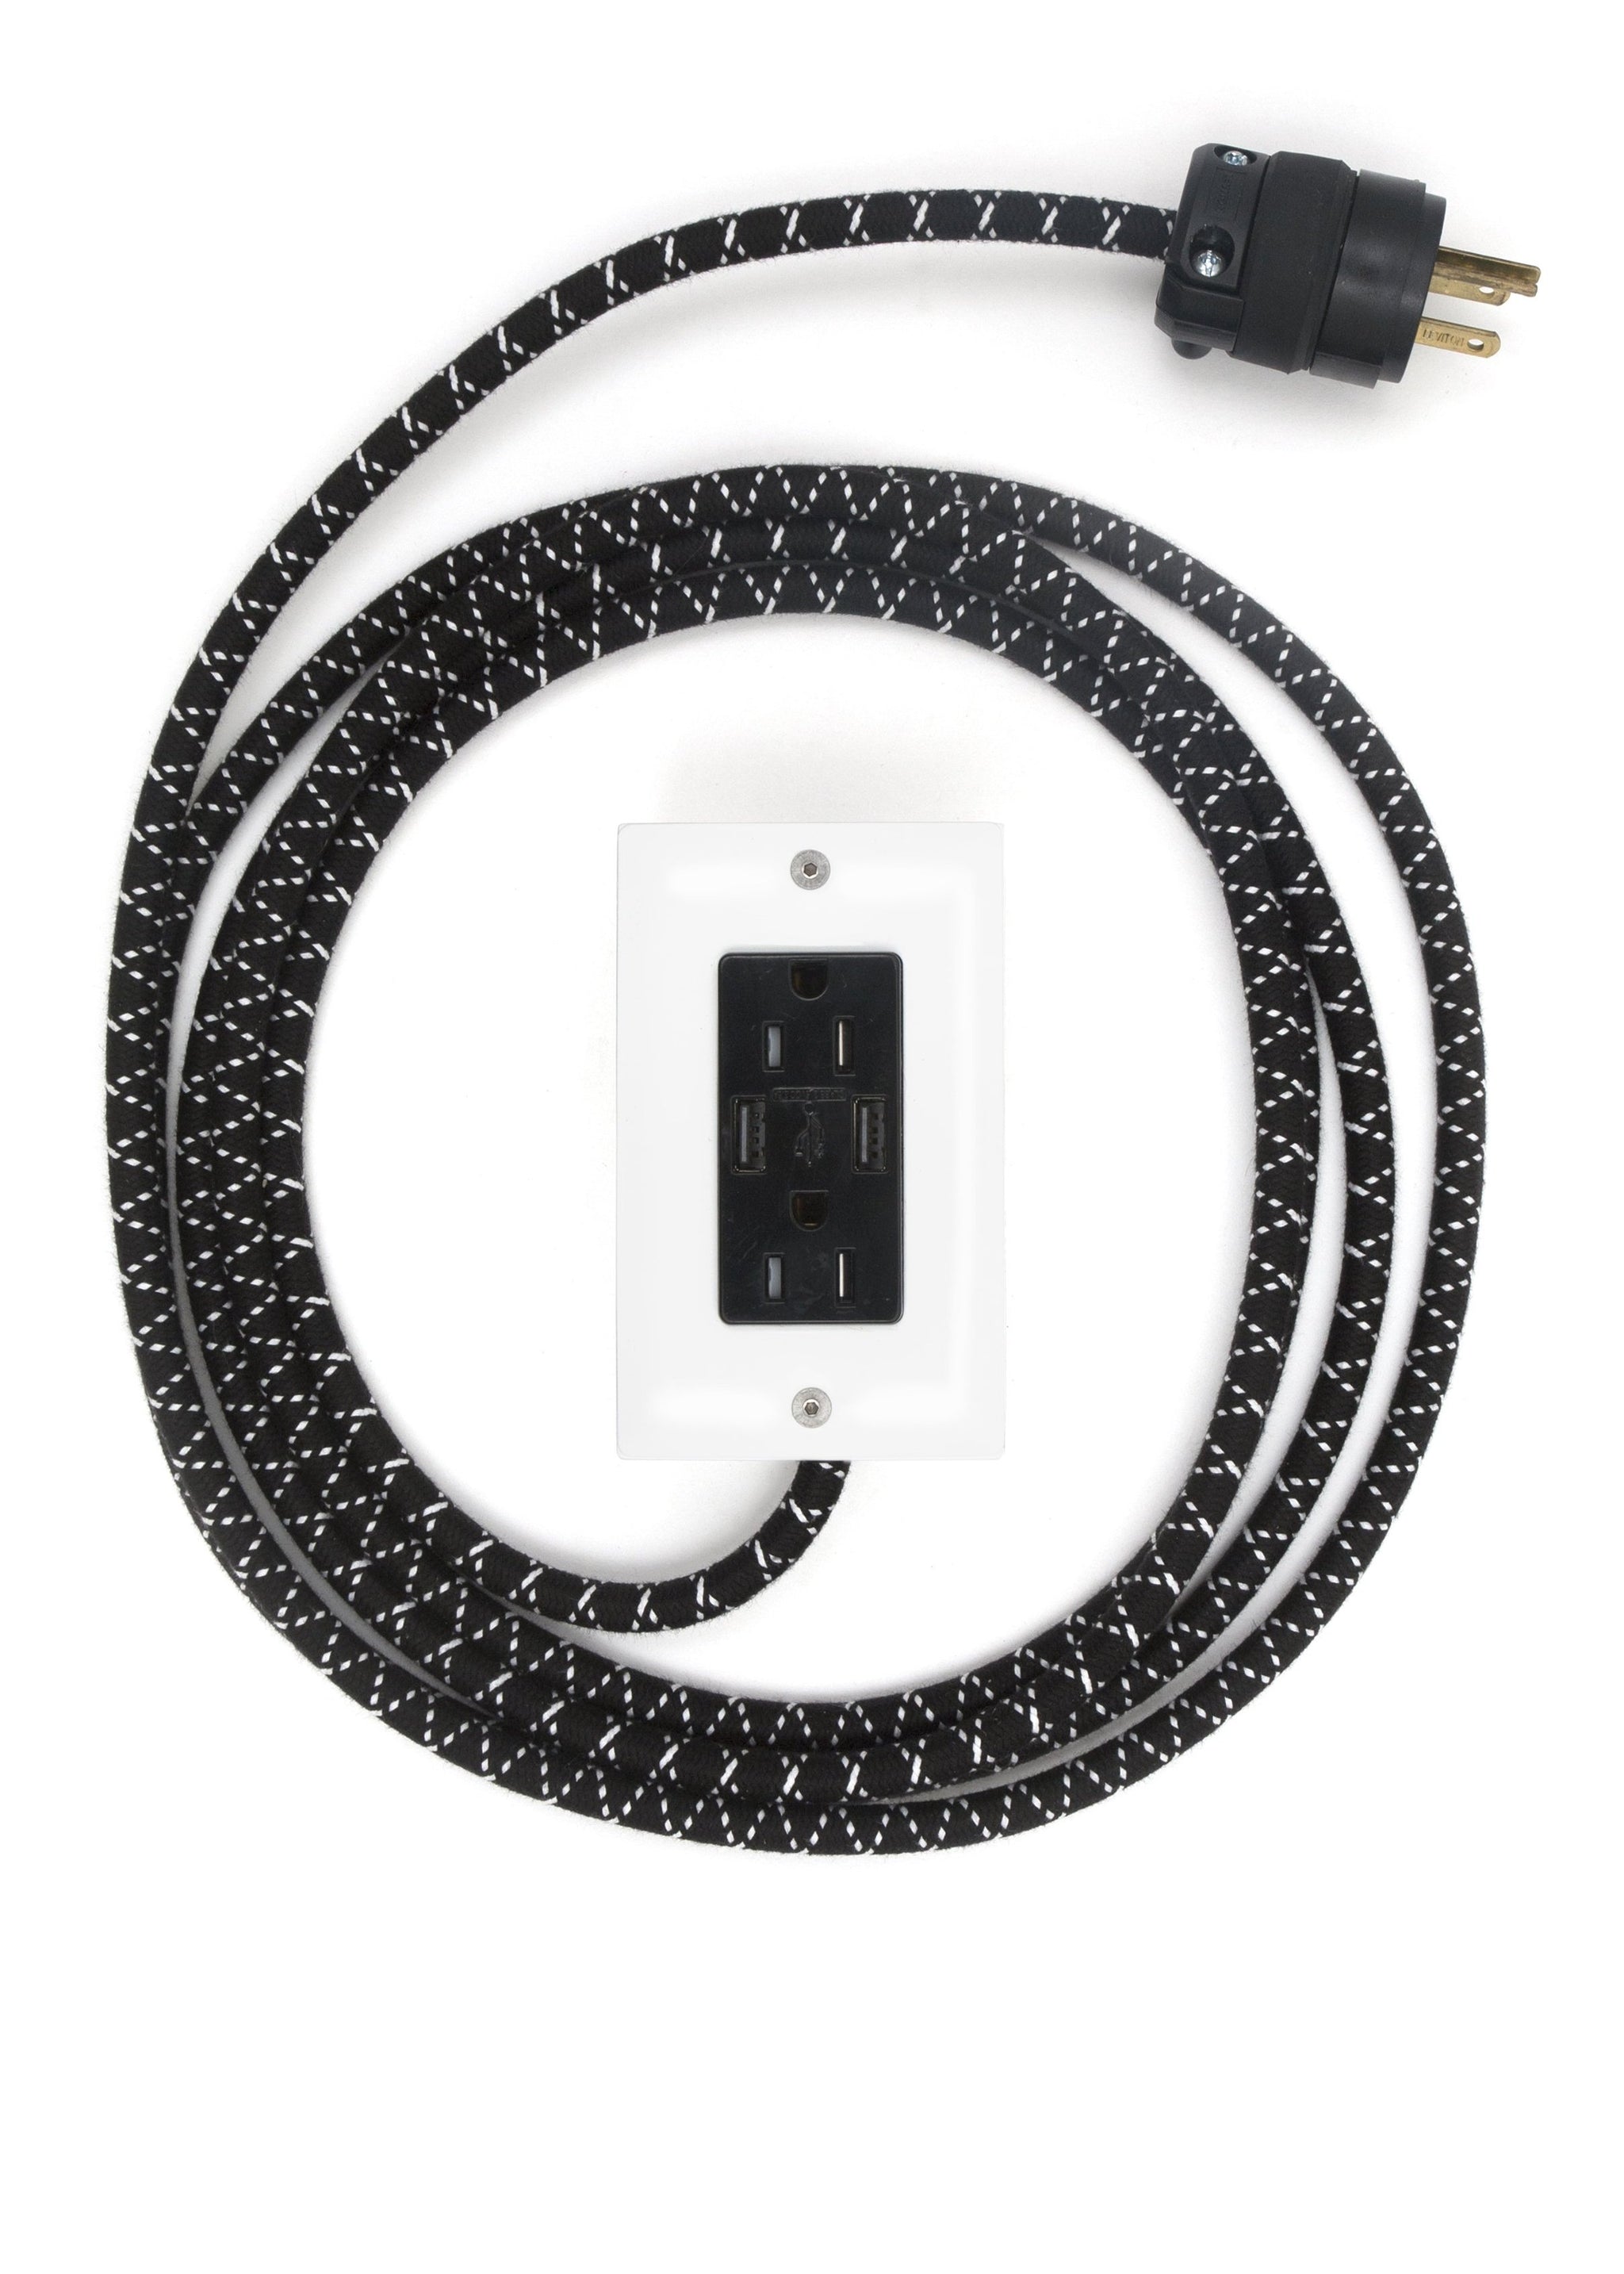 The First Smart Chip Extension Cord - 12' Extō Dual-USB, Dual-Outlet - AC/DC